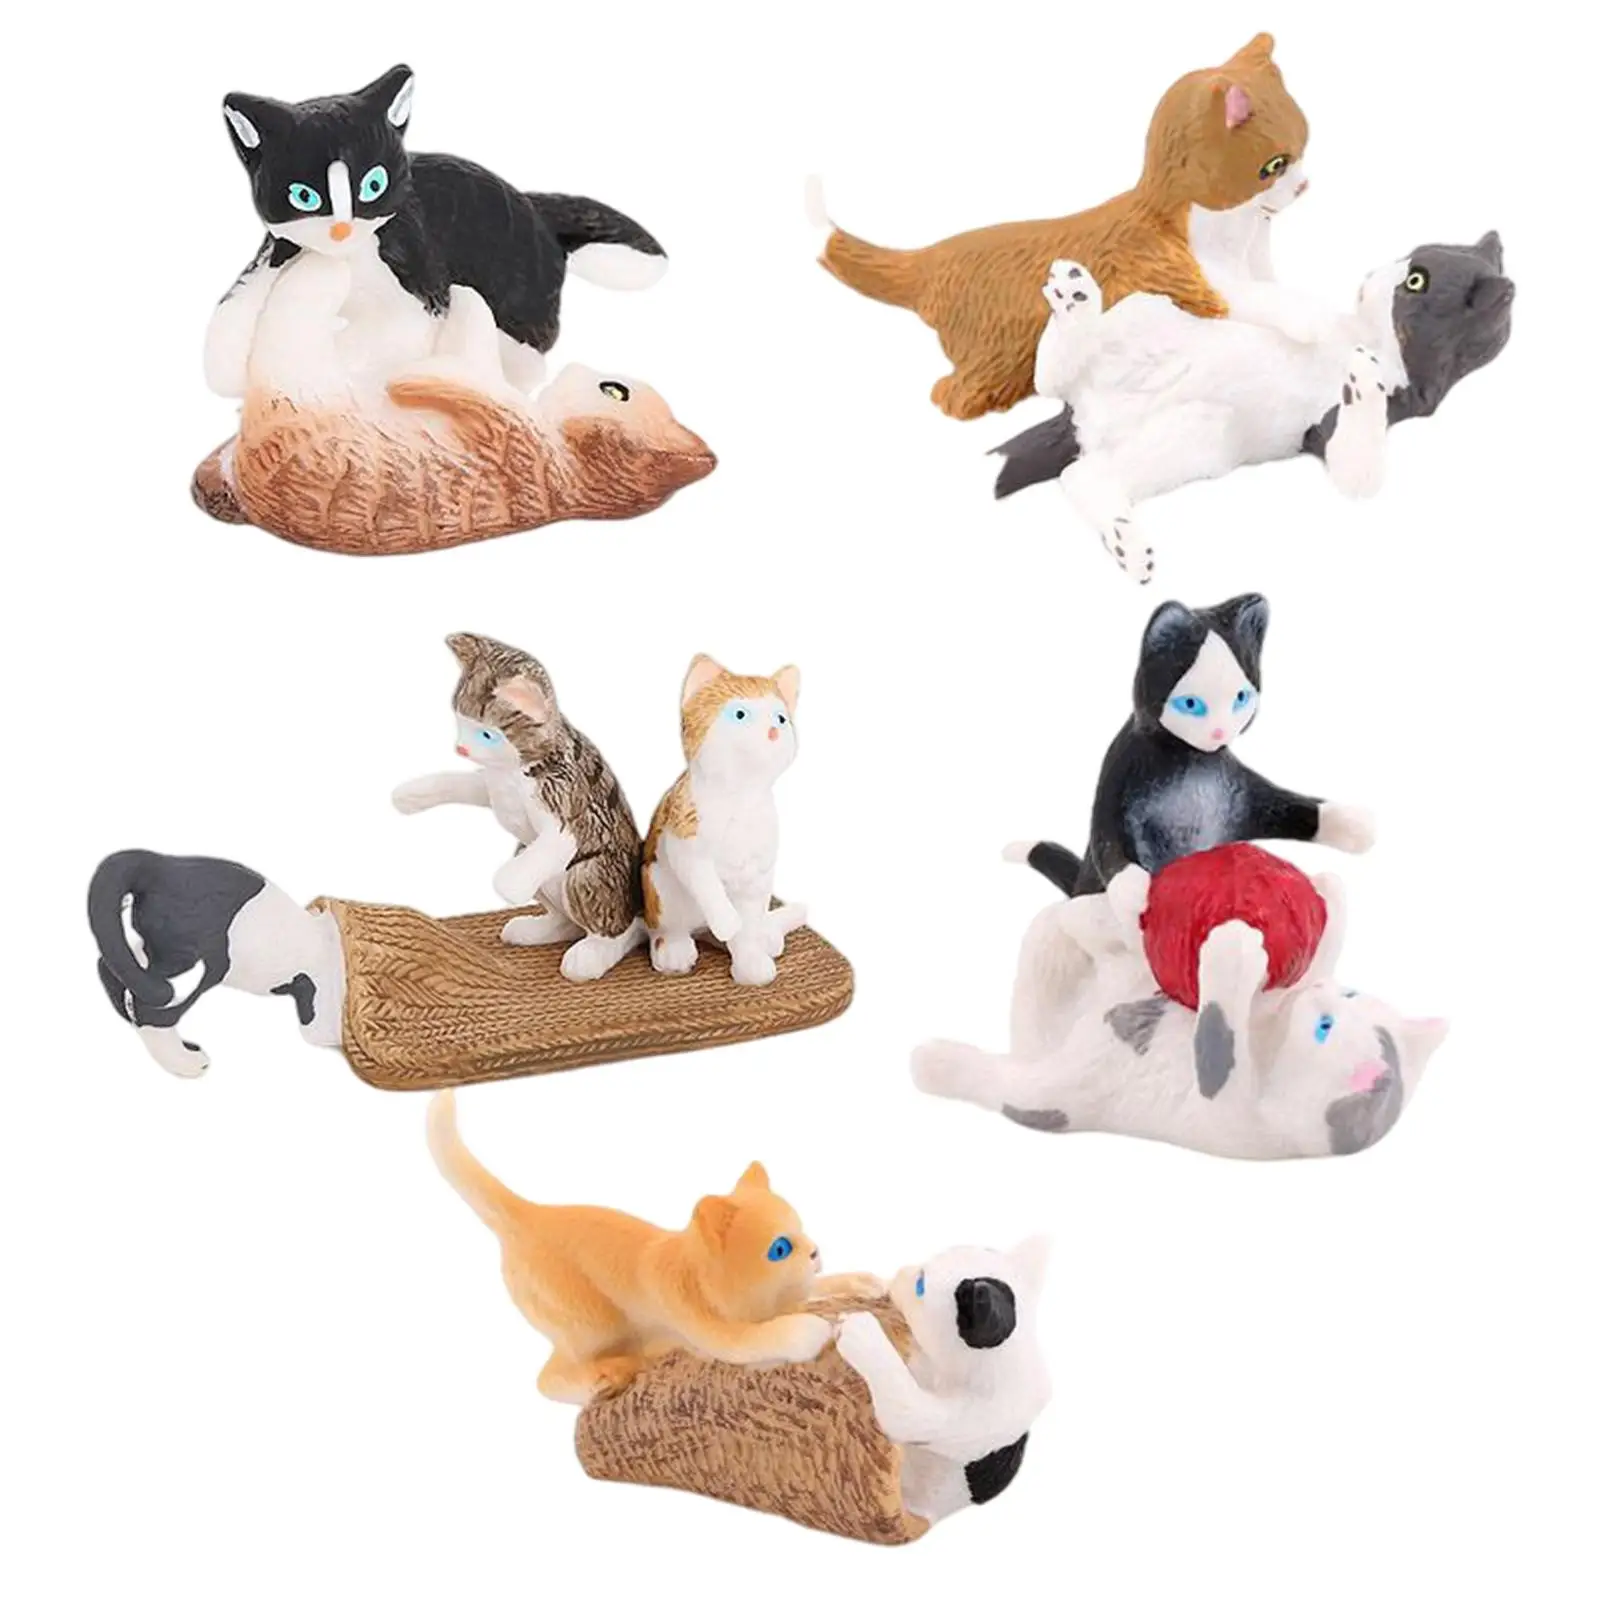 5 Pieces Simulation Cat Figures Home Decor Statues Playset for Boys and Girls Birthday Gift